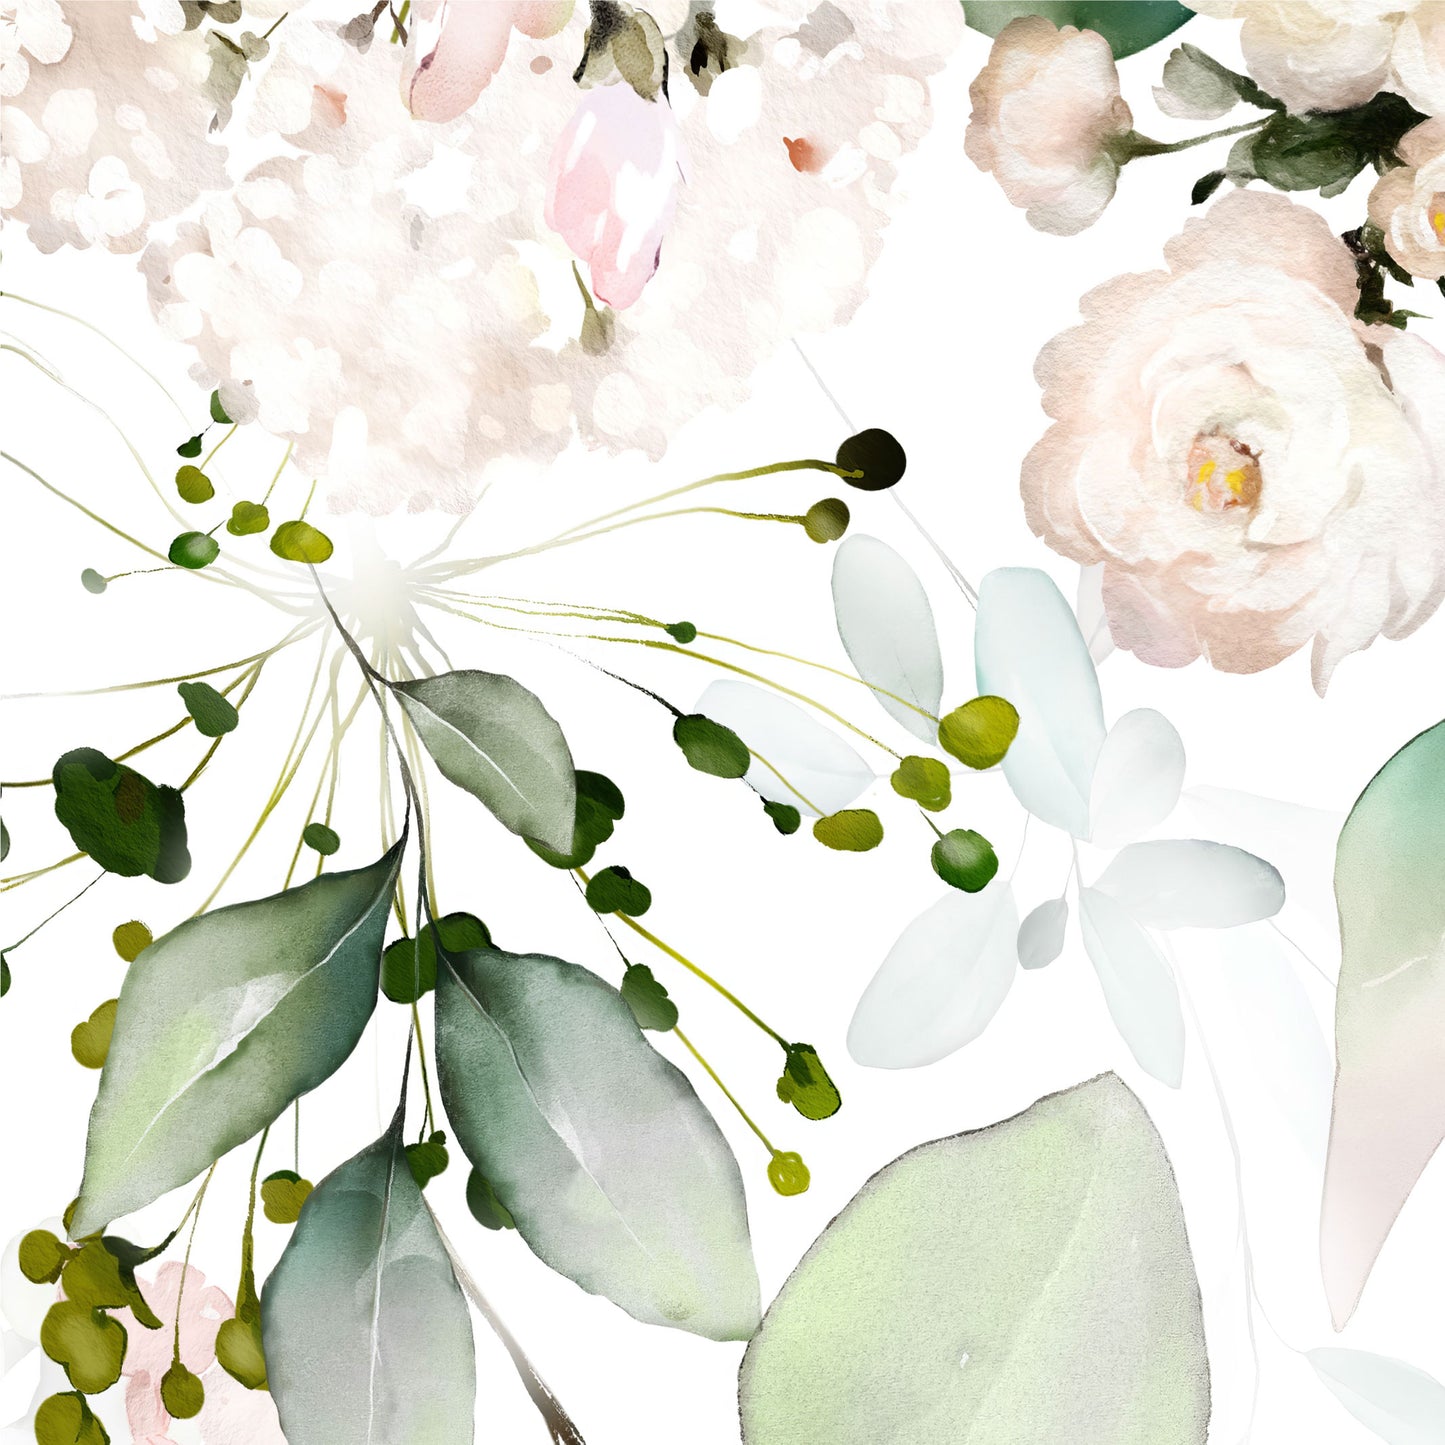 Exquisite watercolor botanical mural with sage green hues and delicately painted floral accents.